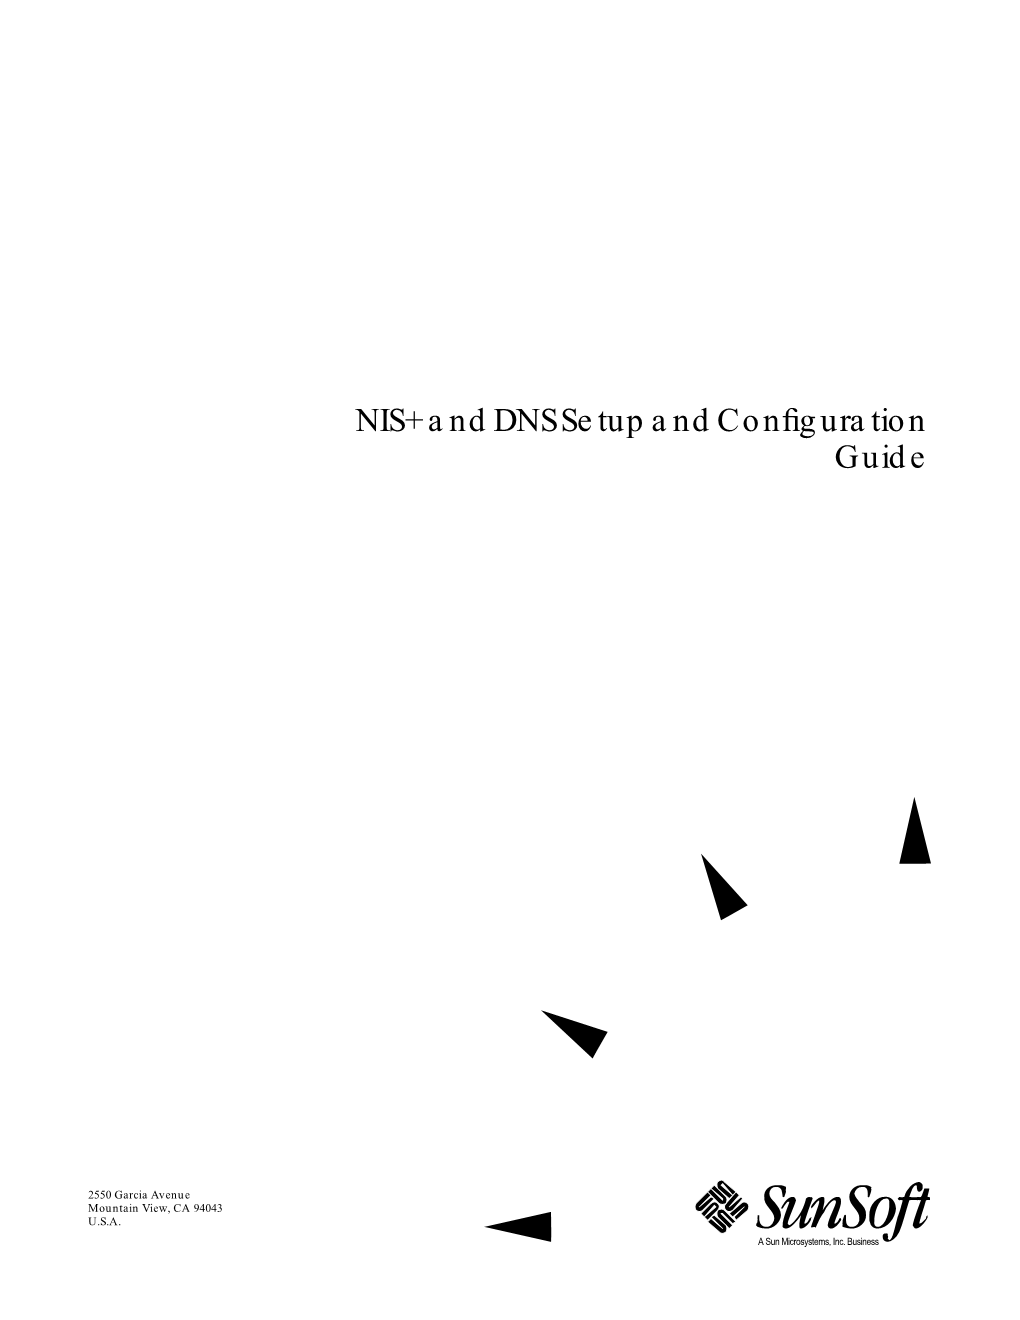 NIS+ and DNS Setup and Configuration Guide